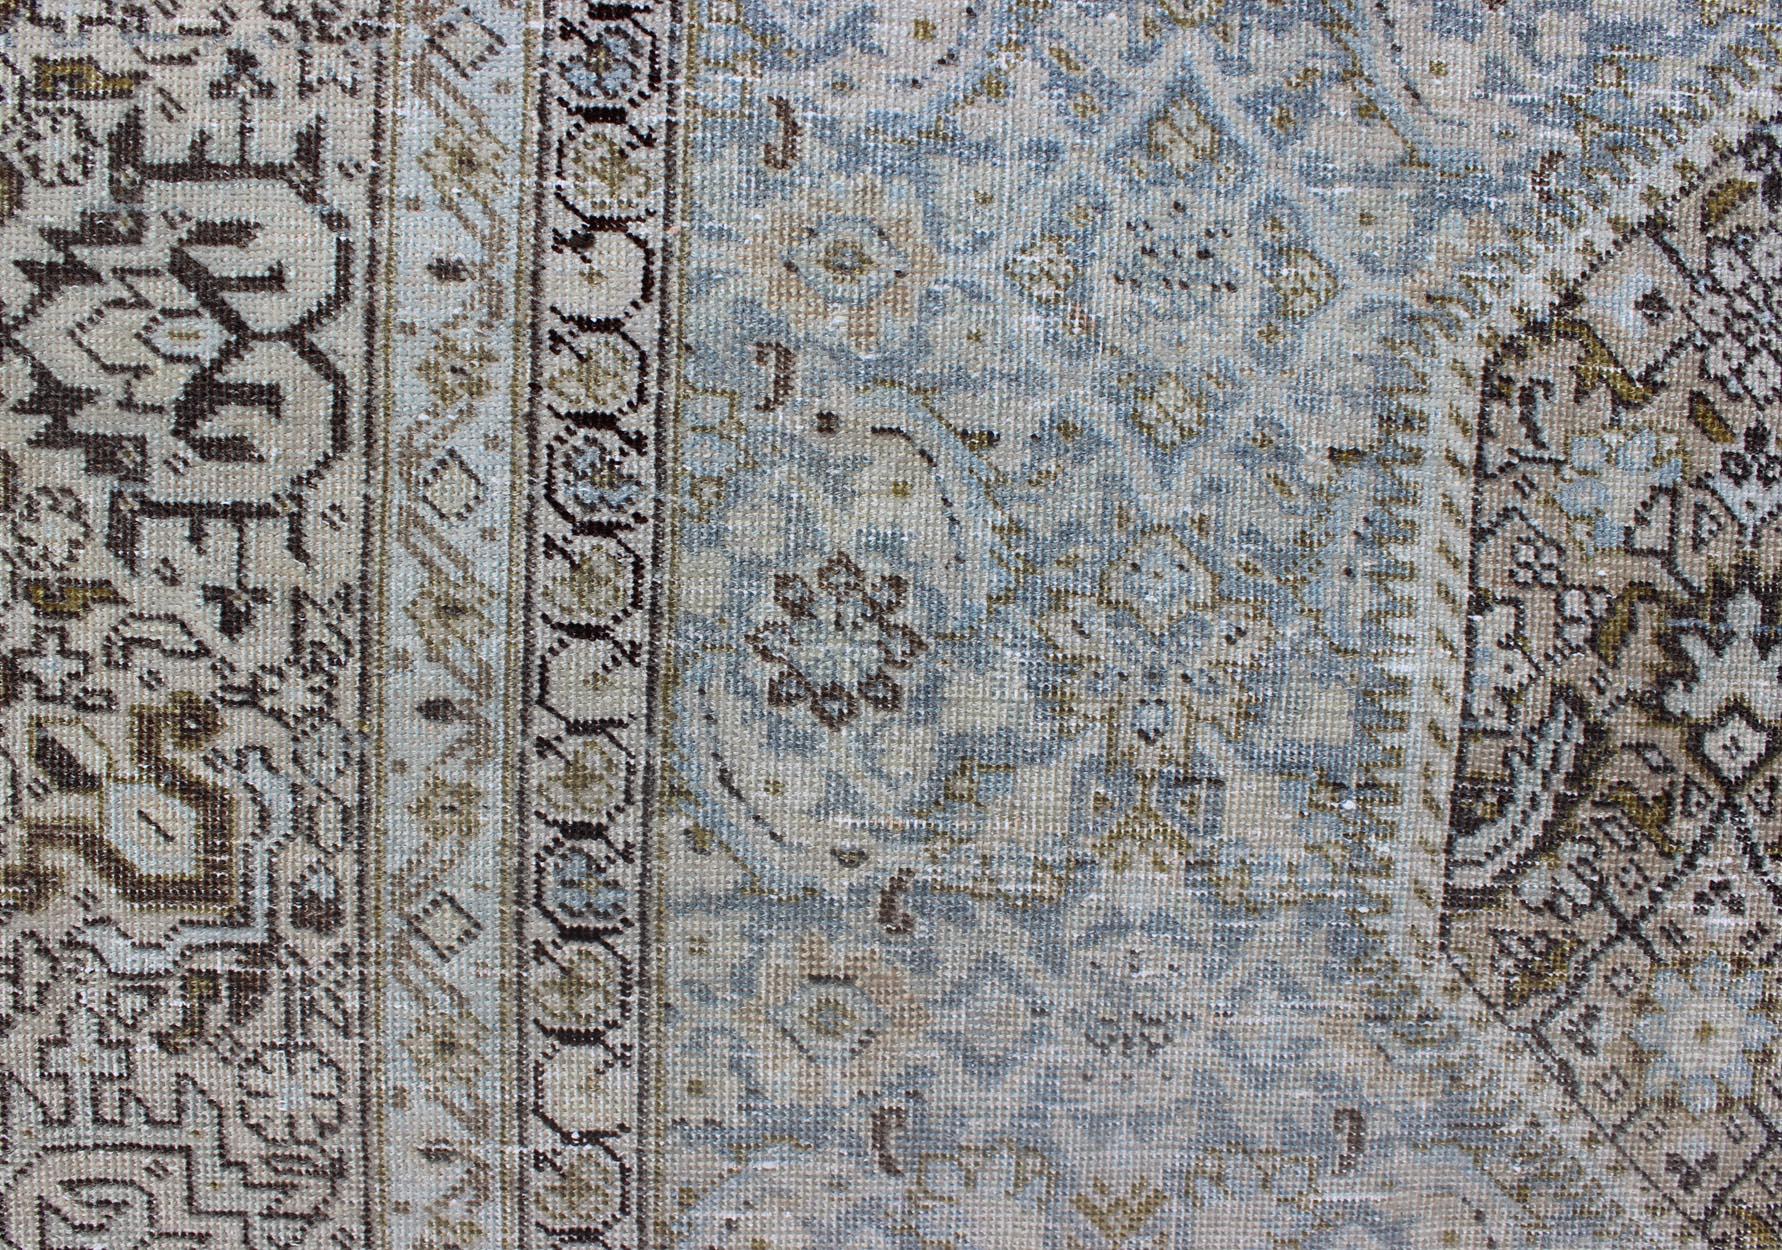 Antique Persian Tabriz Rug with Medallion in Light Blue, Tan and Brown Colors 1